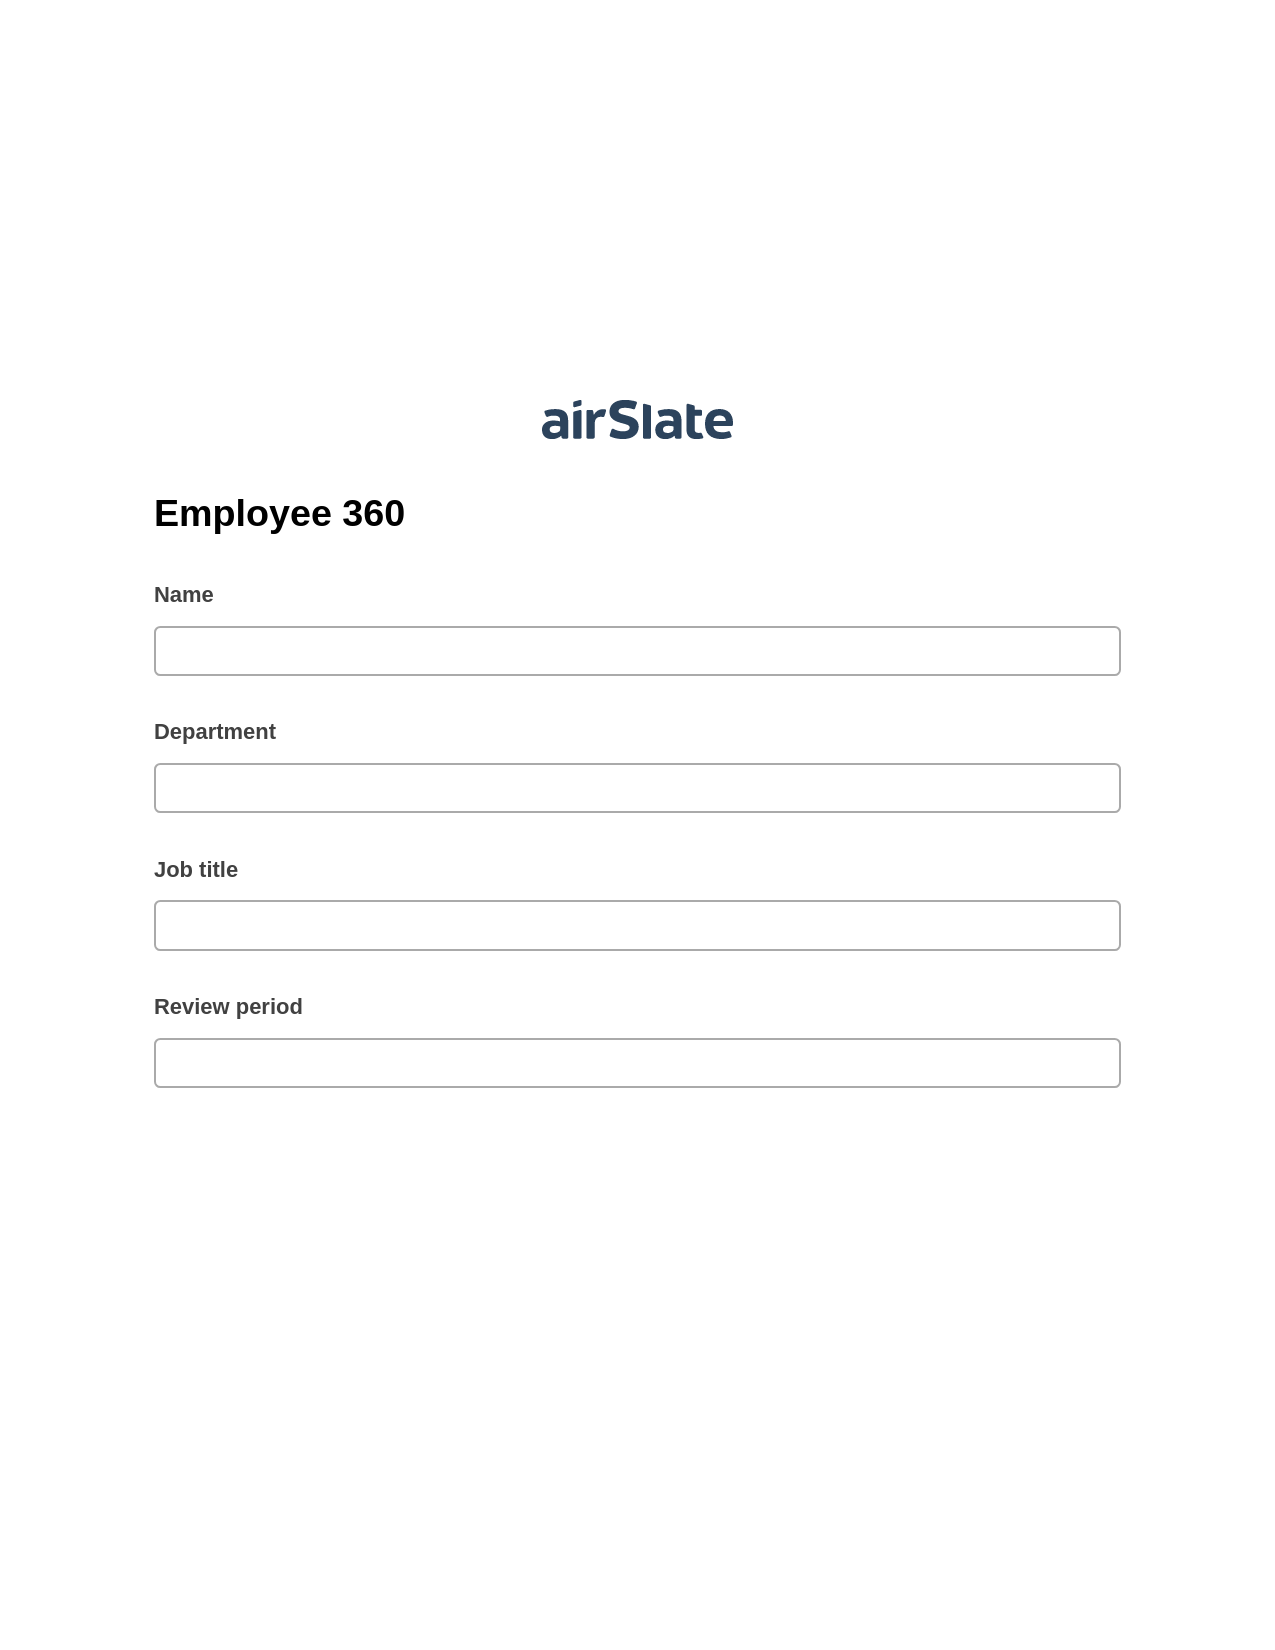 Employee 360 Pre-fill from Salesforce Records Bot, Update MS Dynamics 365 Record Bot, Archive to Google Drive Bot